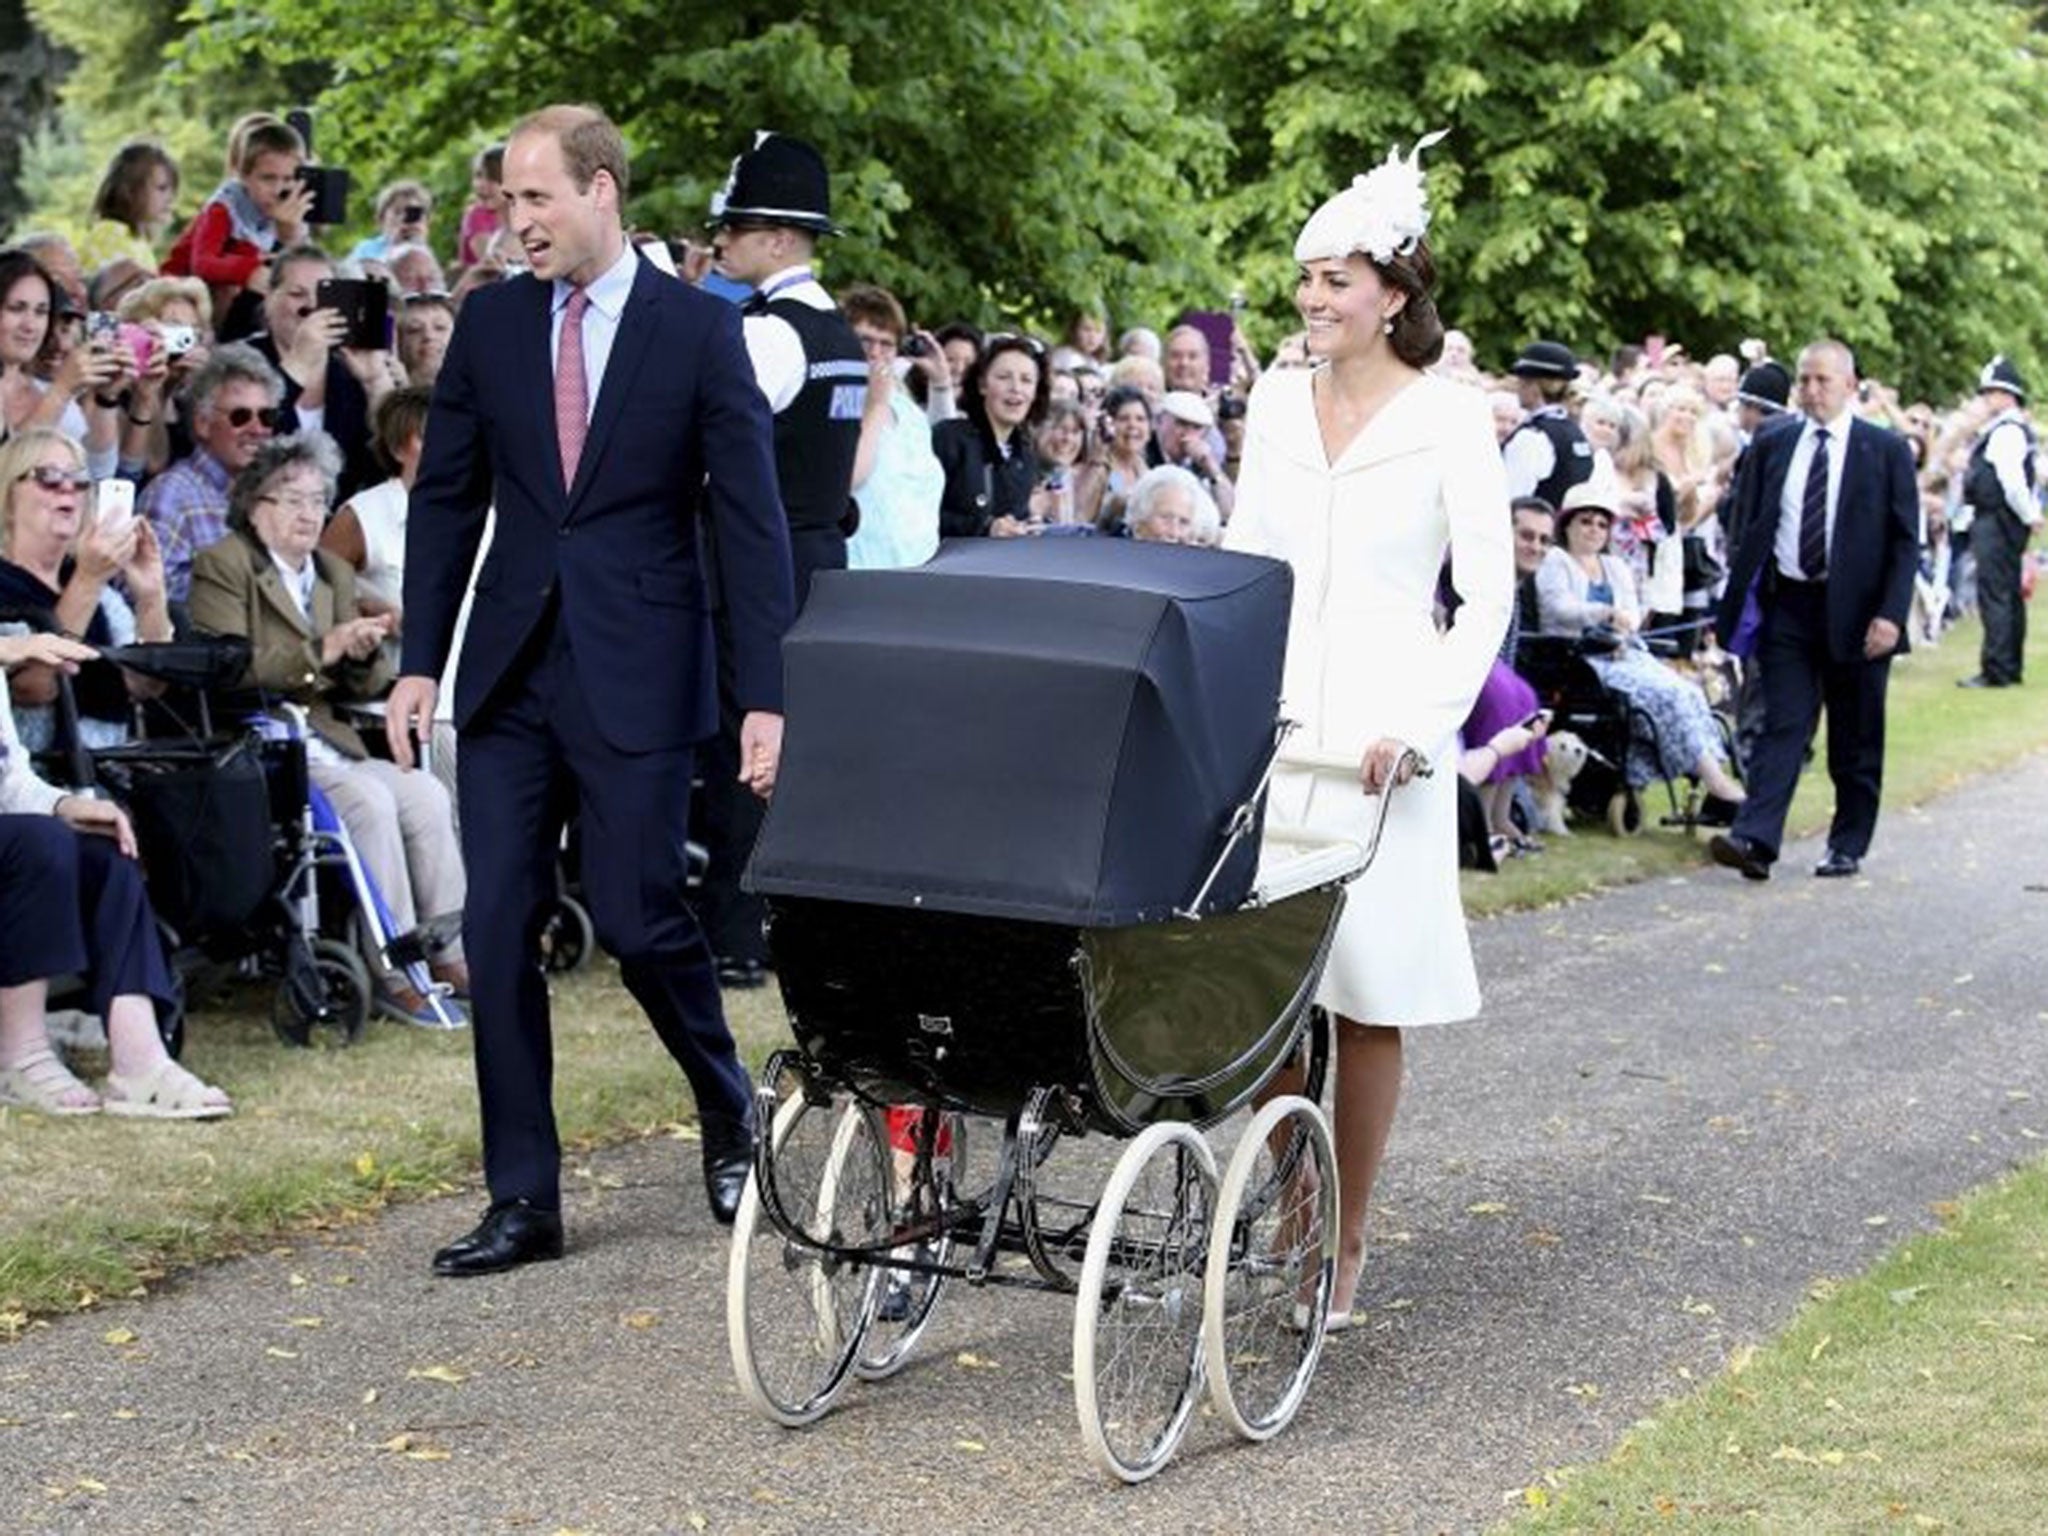 The Duke and Duchess of Cambridge walk past well wishers as they arrive with their son Prince George and daughter Princess Charlotte for her christening at the Church of St. Mary Magdalene in Sandringham